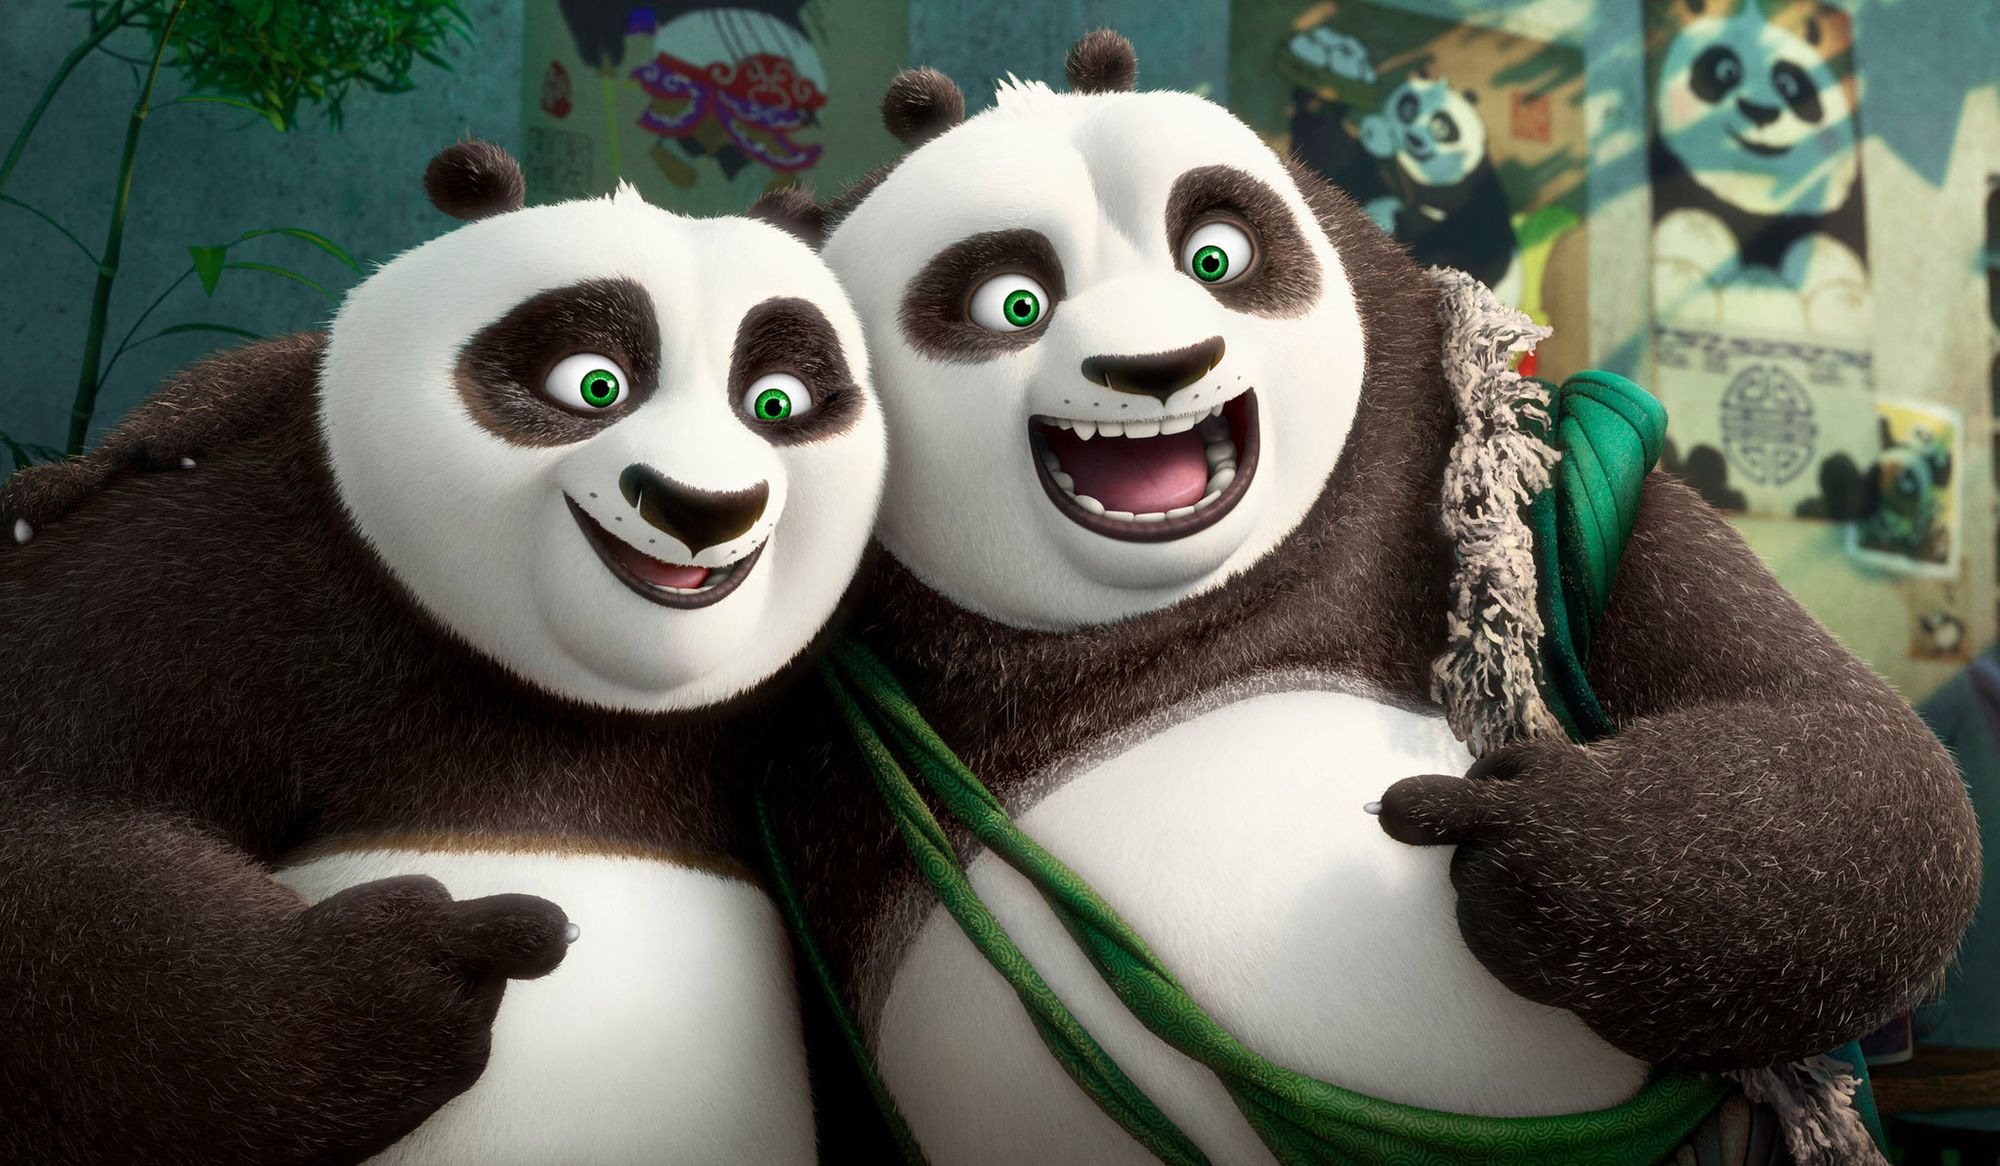 How to Watch Kung Fu Panda 3 on Netflix - Best VPNs to Use